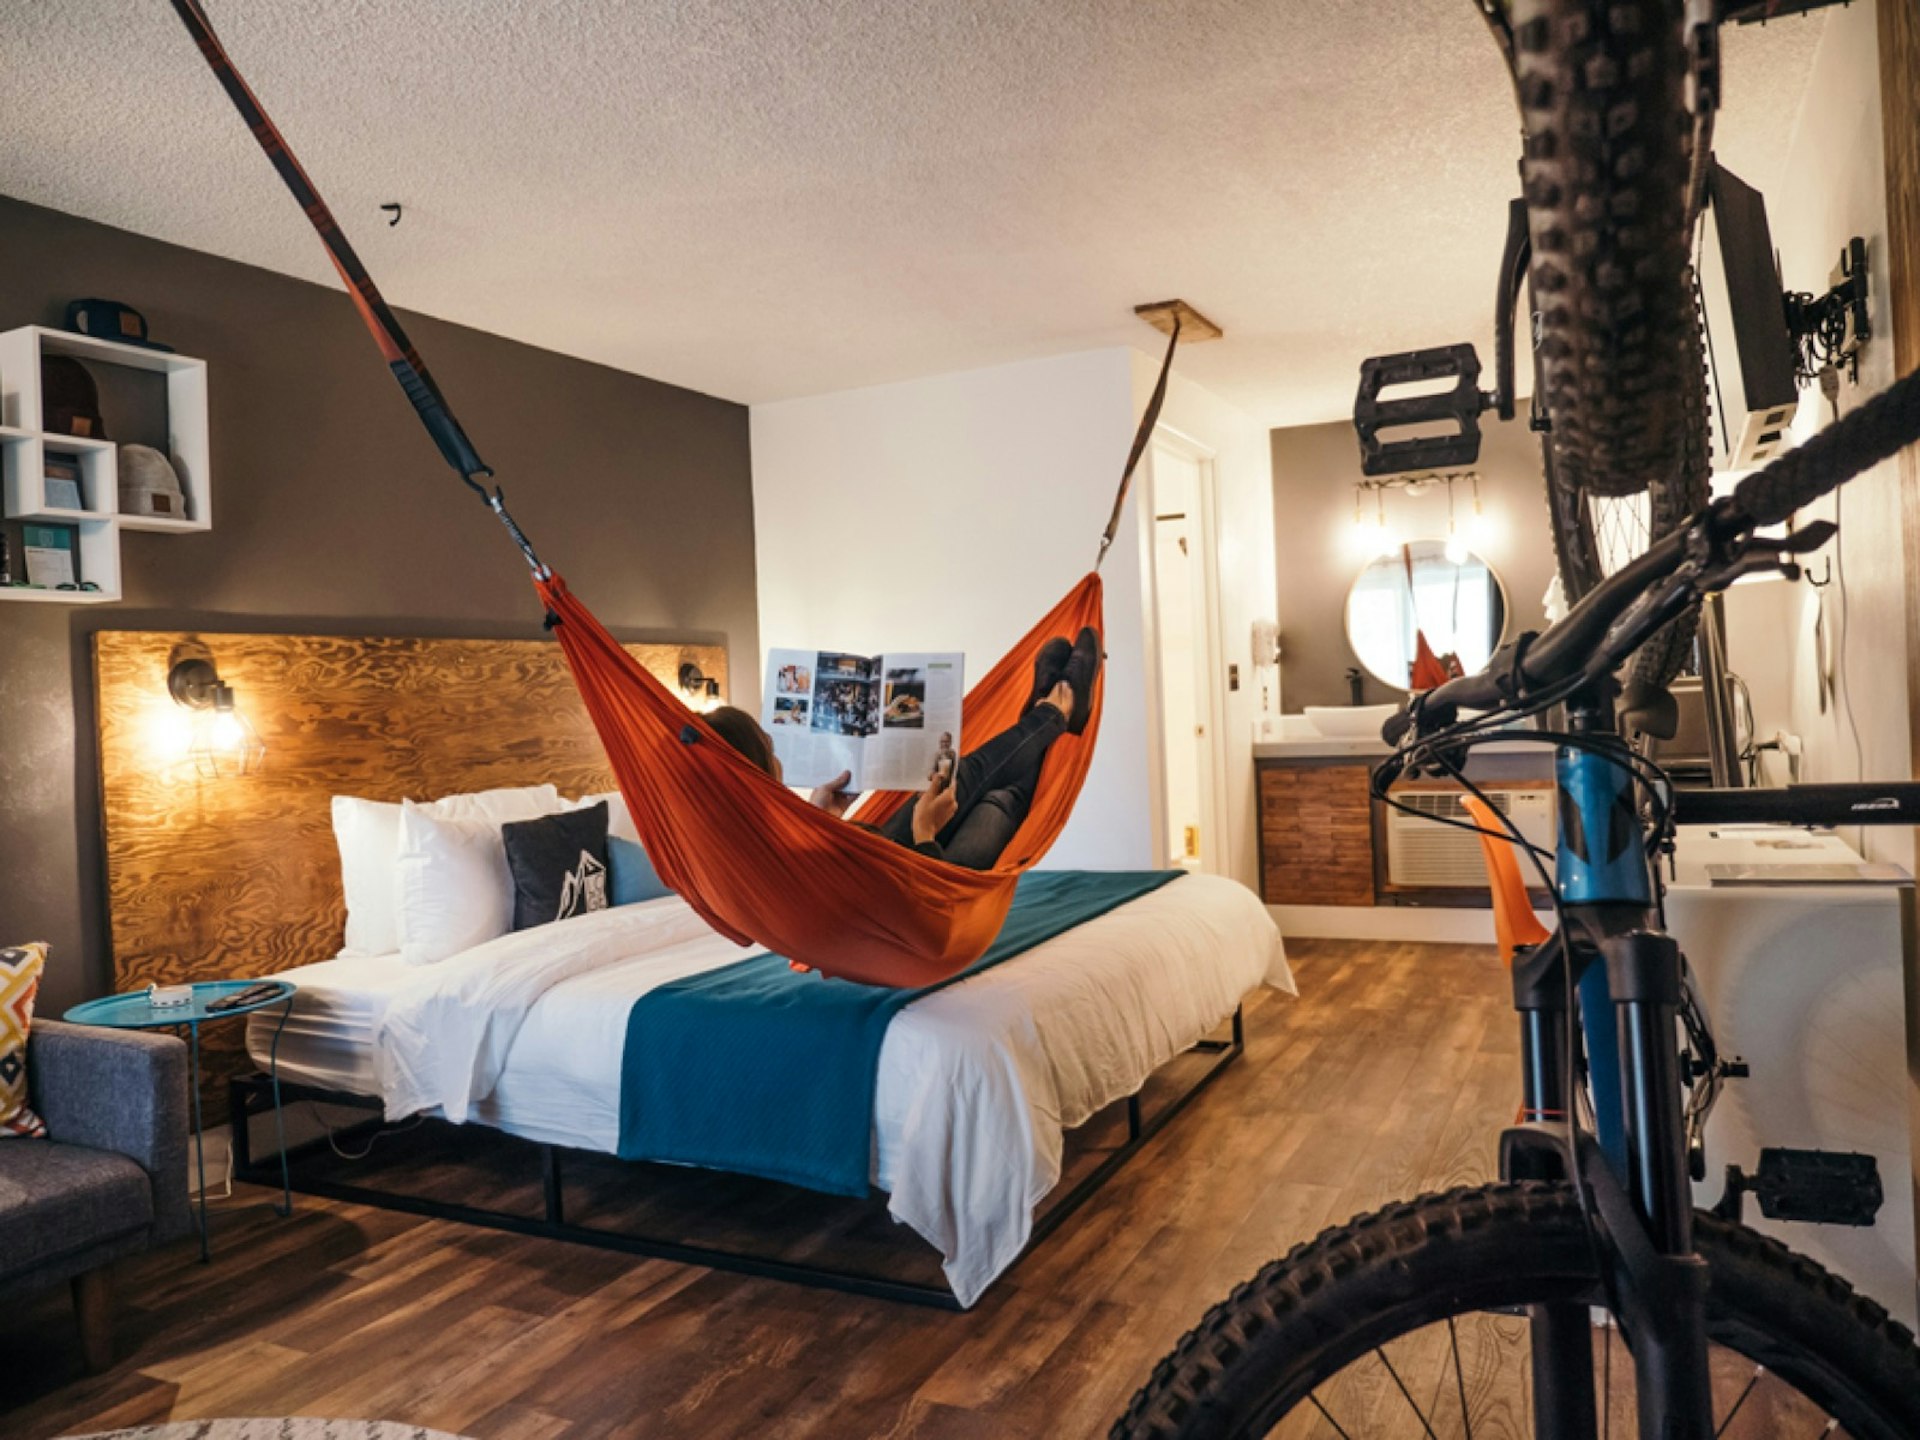 A trendy hotel room with bikes hanging on the wall and a person reclining in a hammock from the ceiling